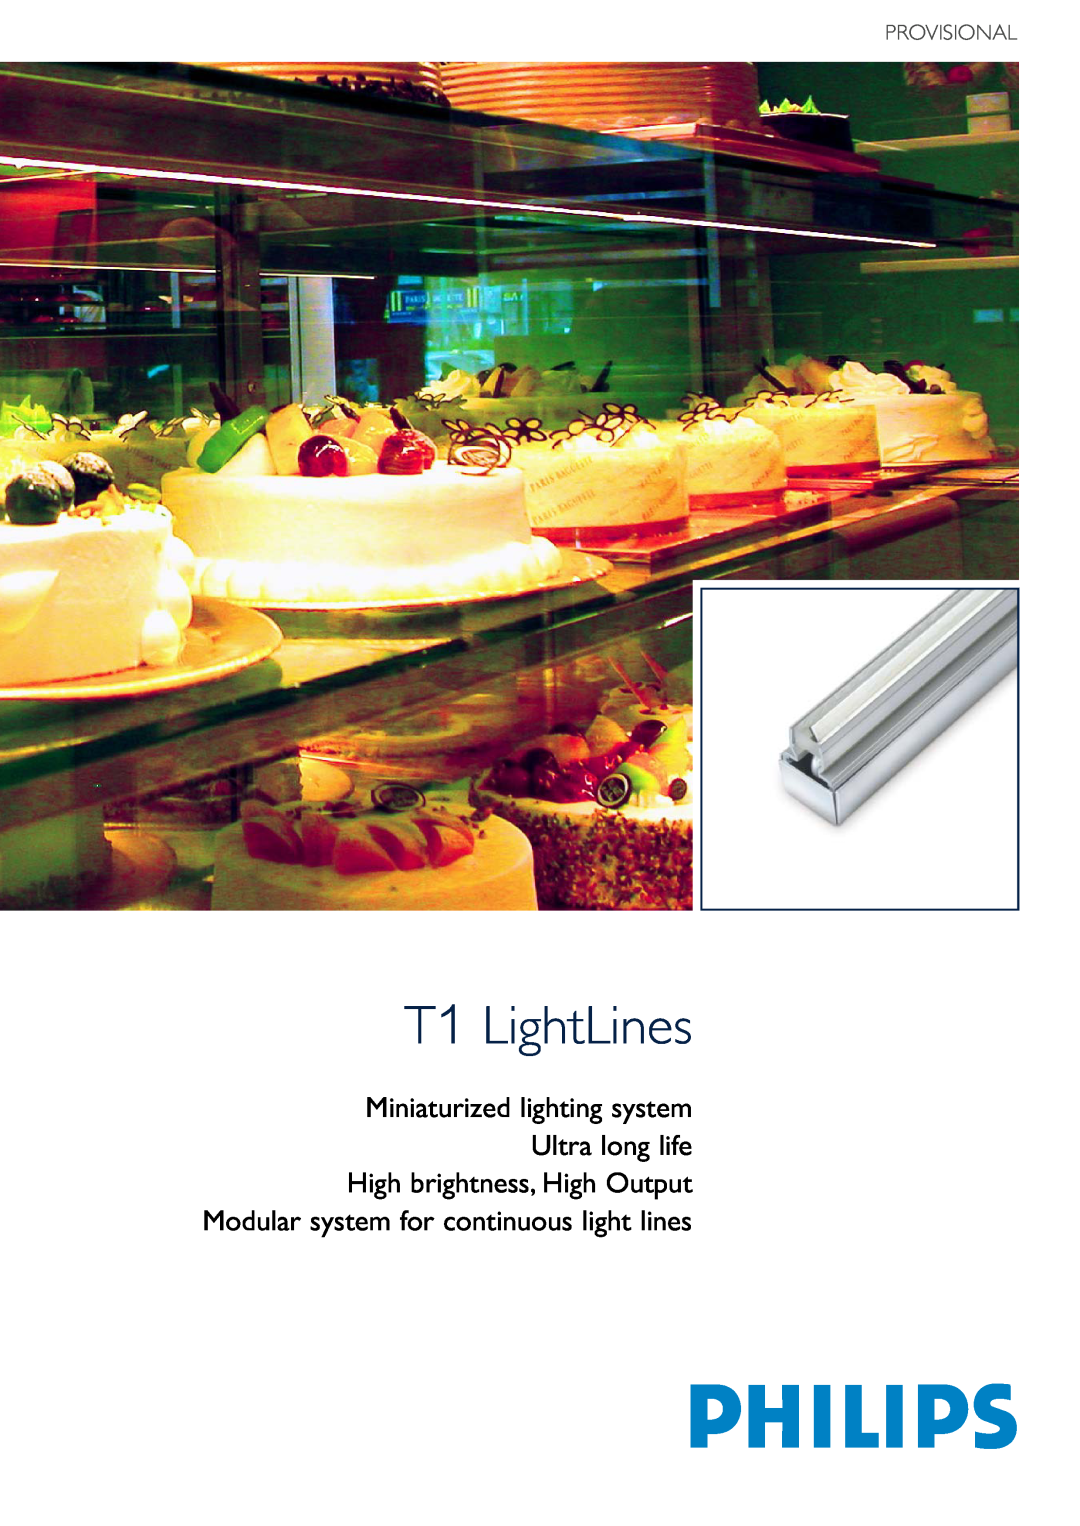 Philips manual Provisional, T1 LightLines, Miniaturized lighting system Ultra long life, High brightness, High Output 